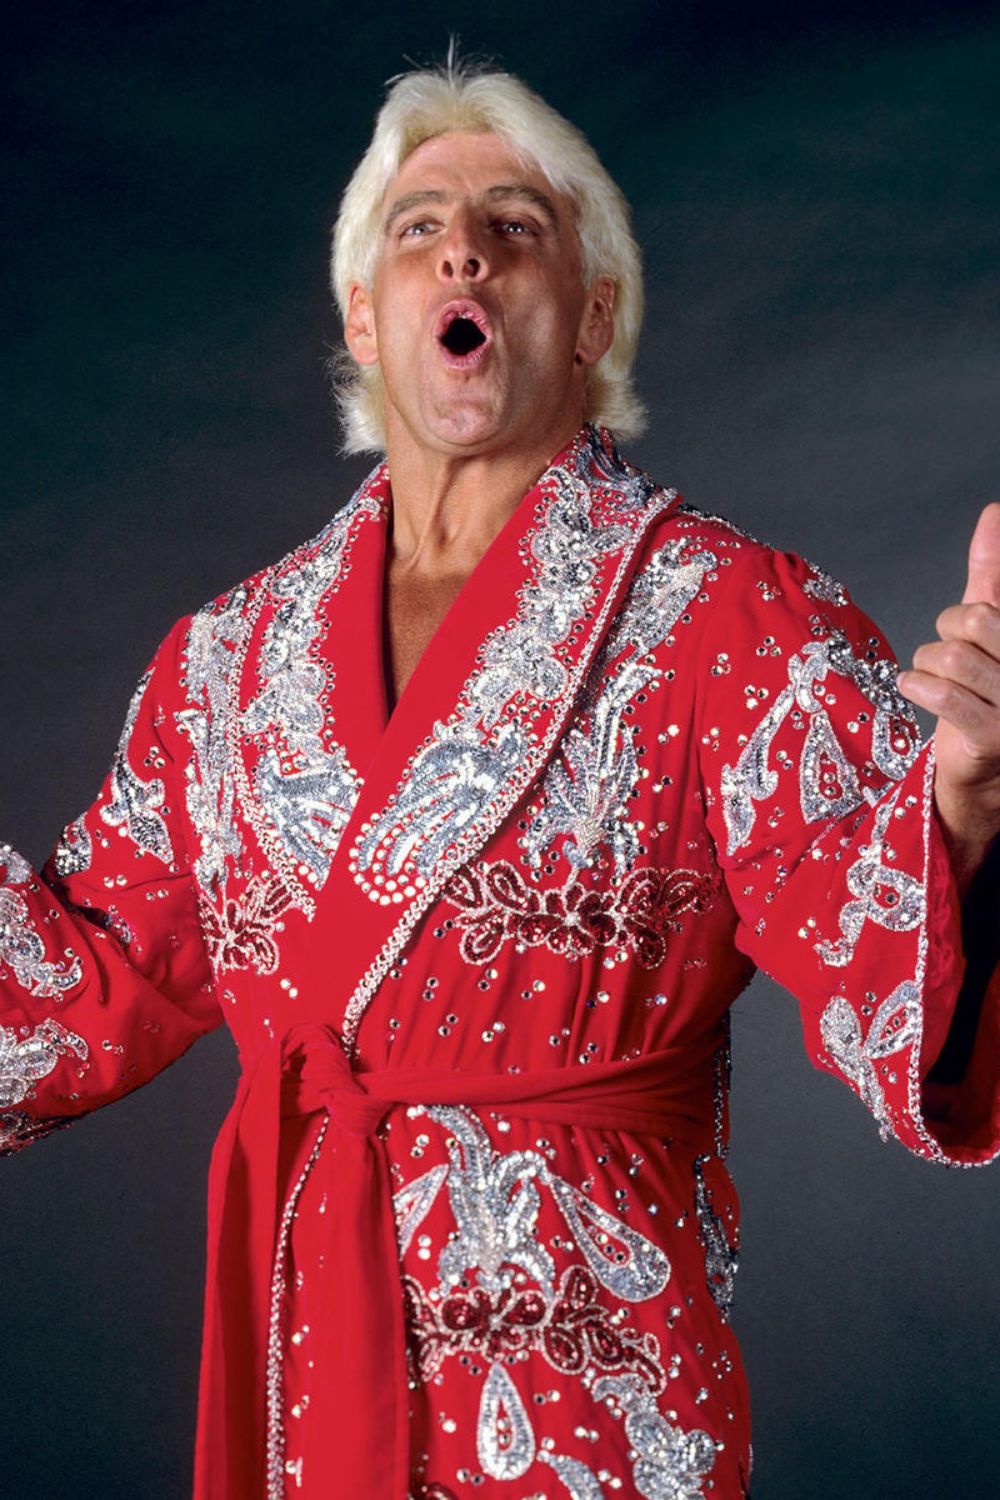 Ric Flair In A Red Robe